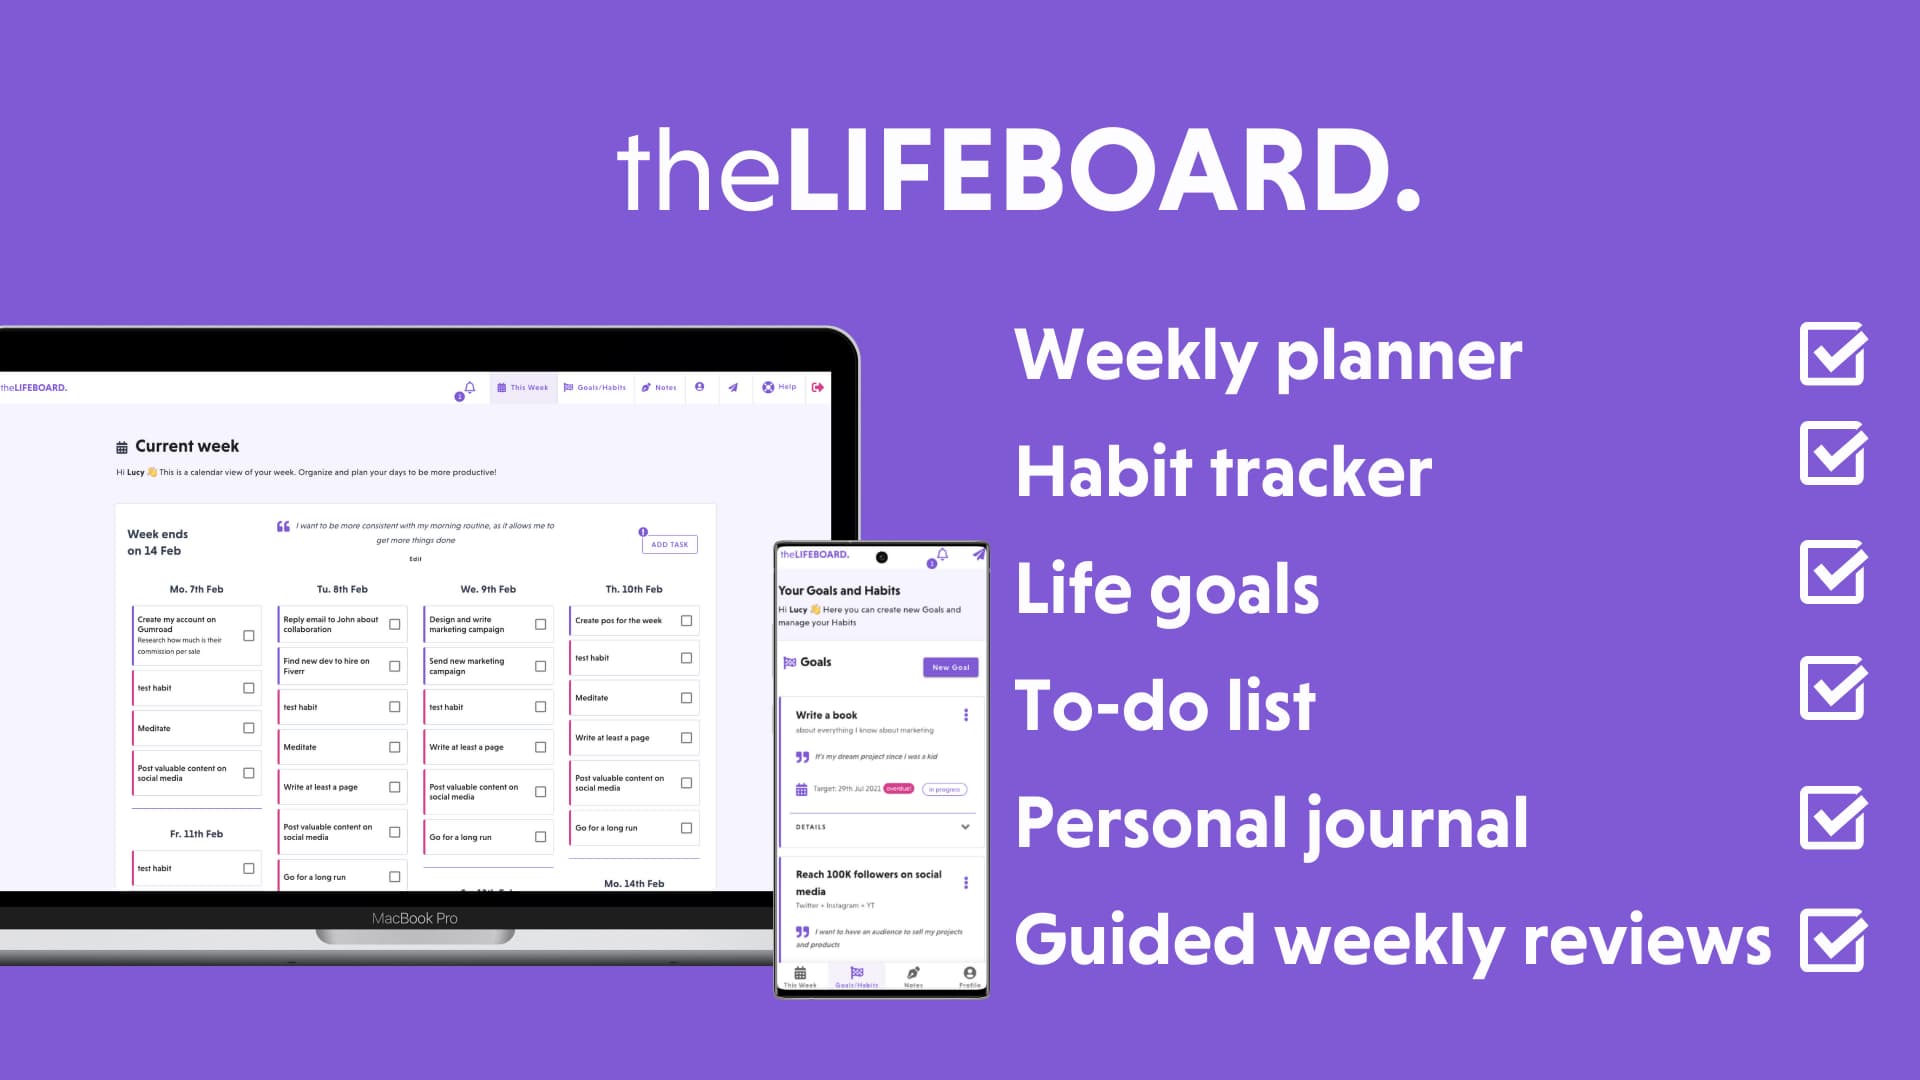 theLIFEBOARD user dashboard